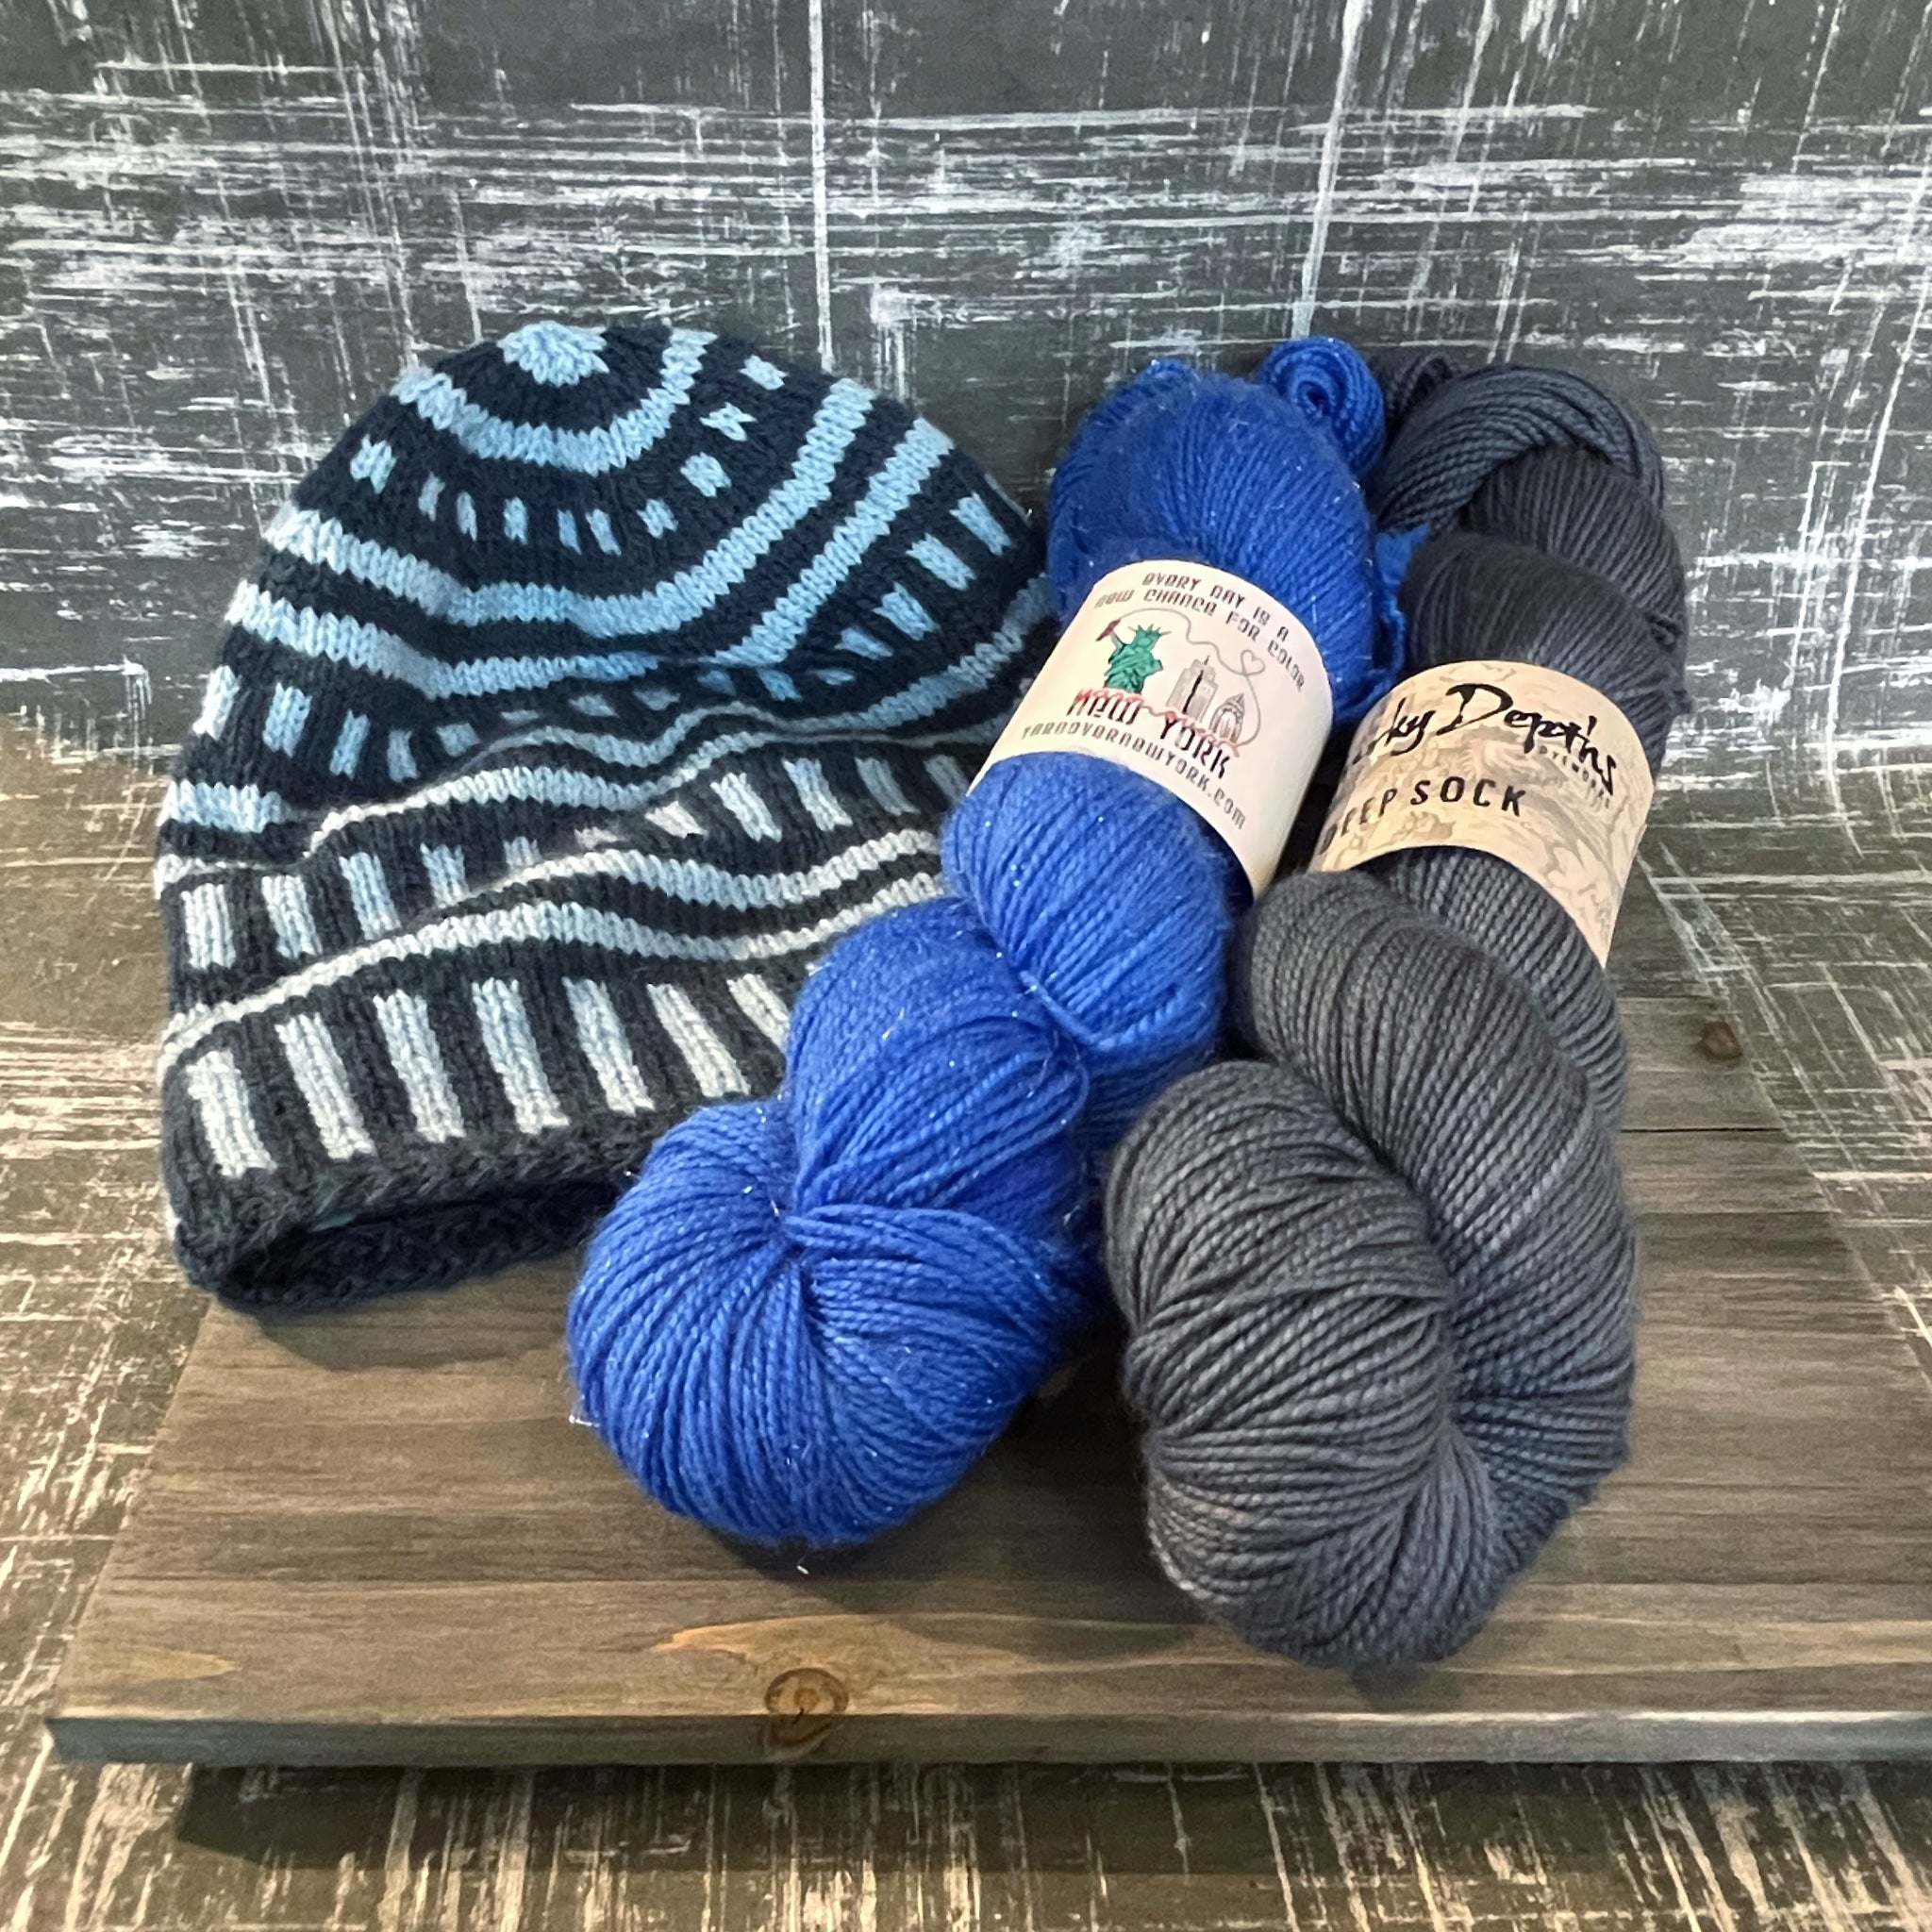 Lineate Hat Kit in Eclair Bleu and Gainsburg, a sparkly blue and dark grey color.